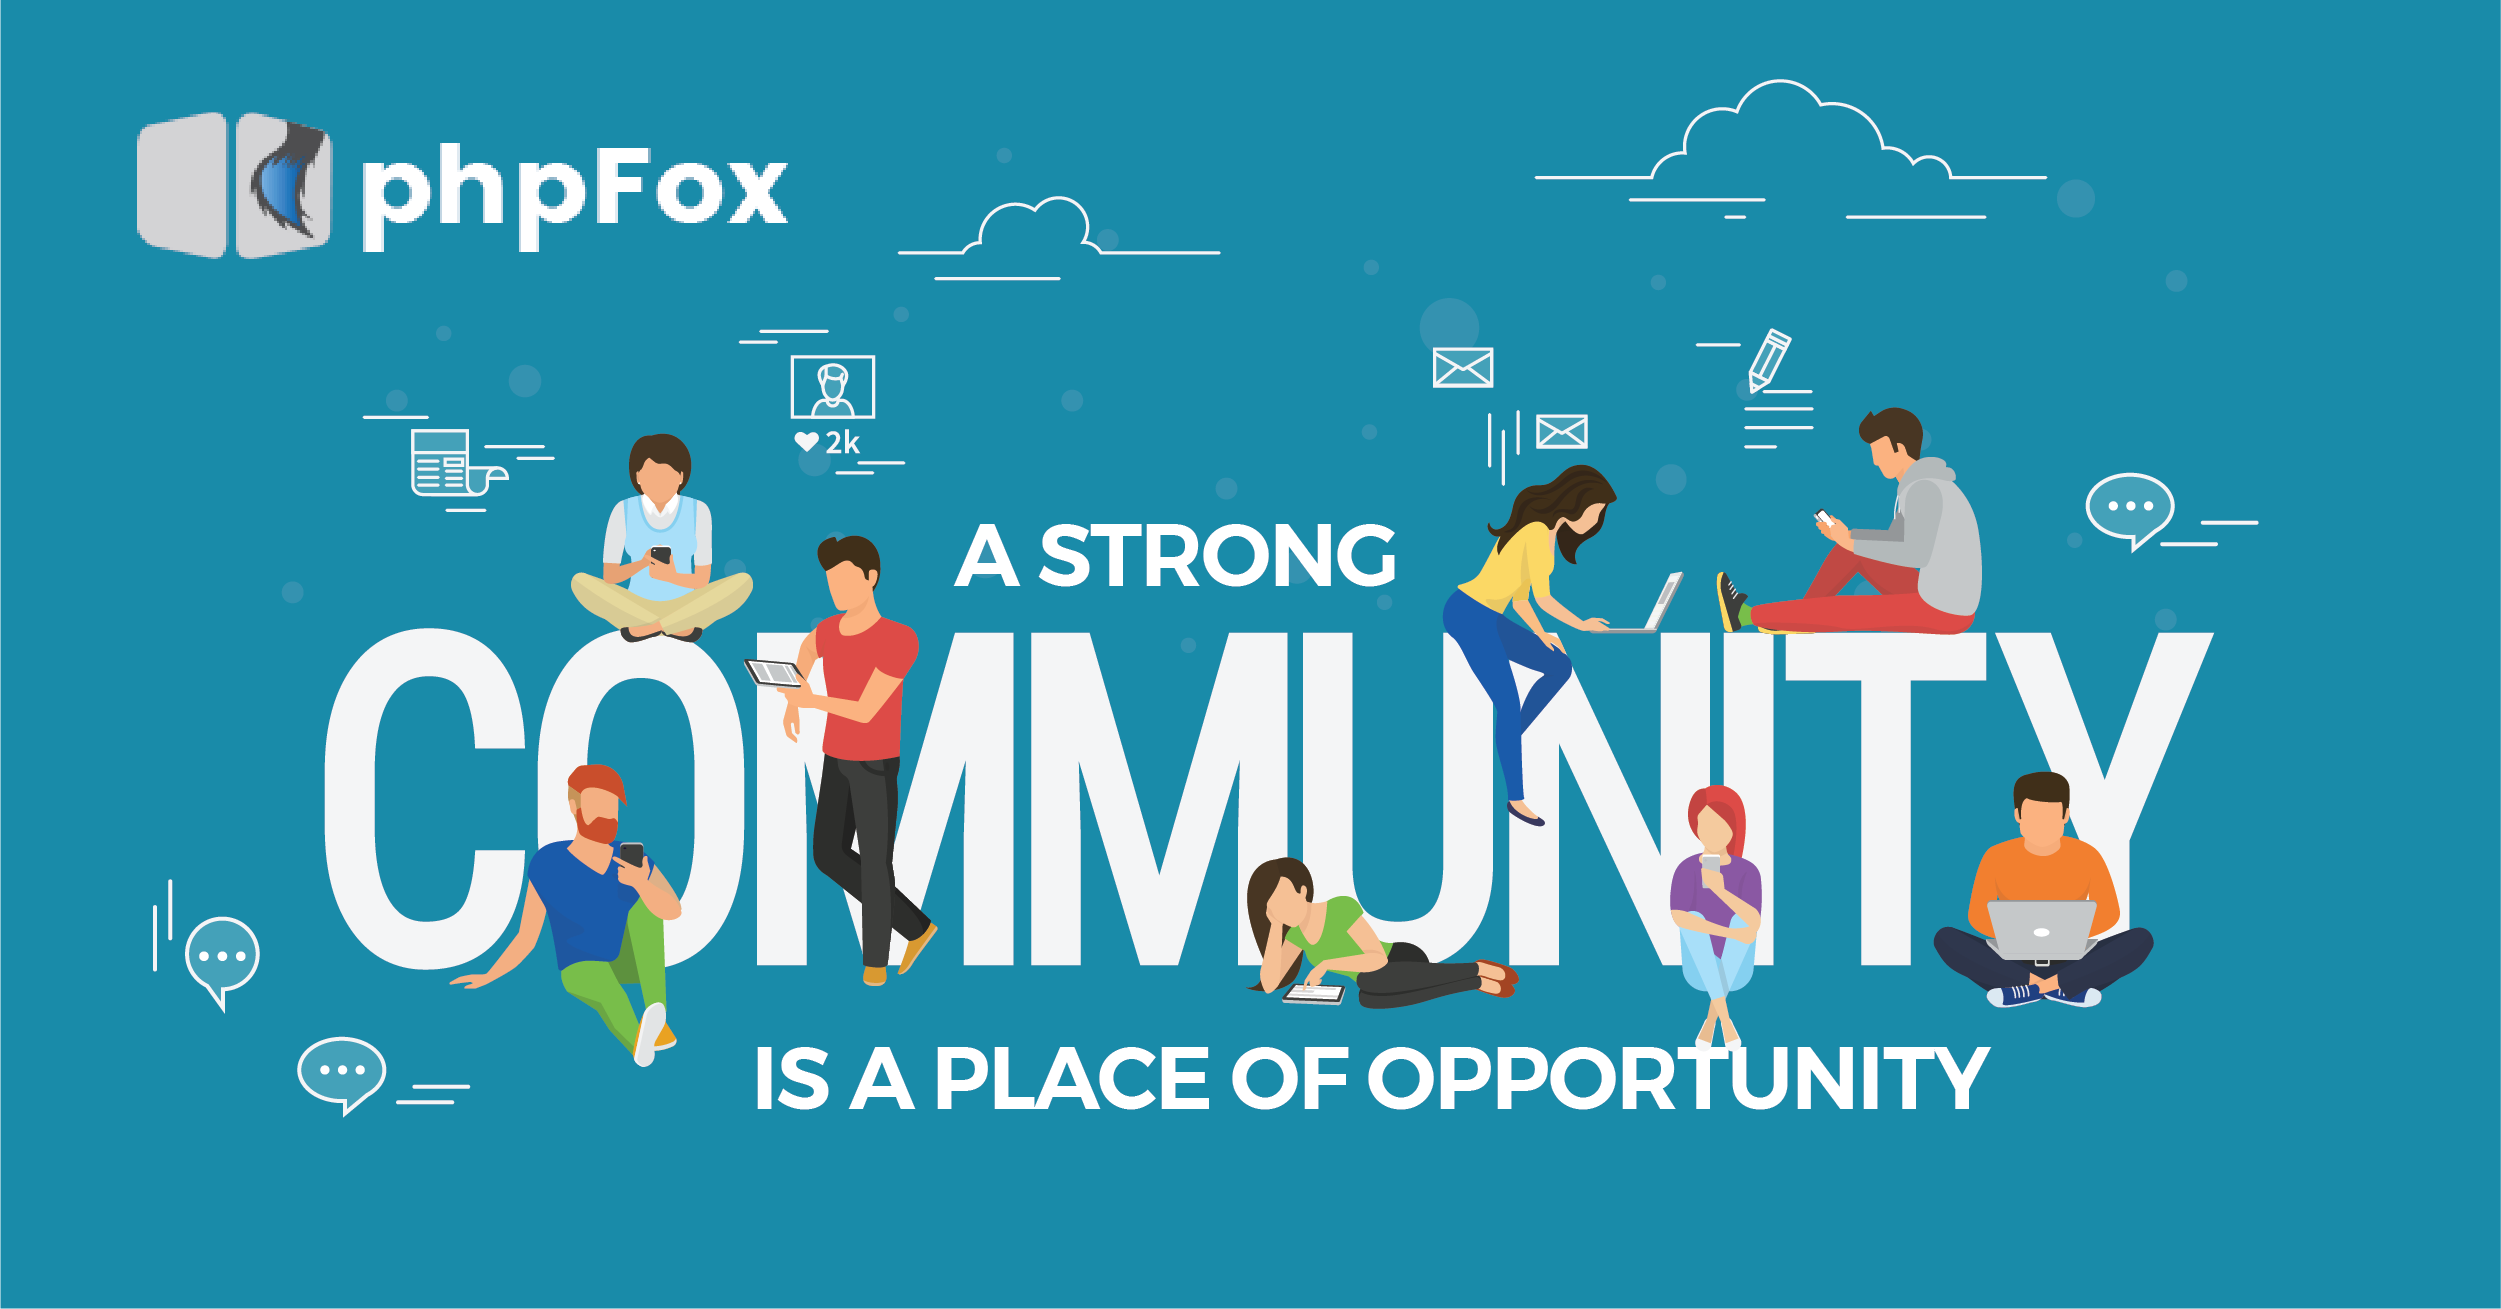 A strong community is a place of opportunity.